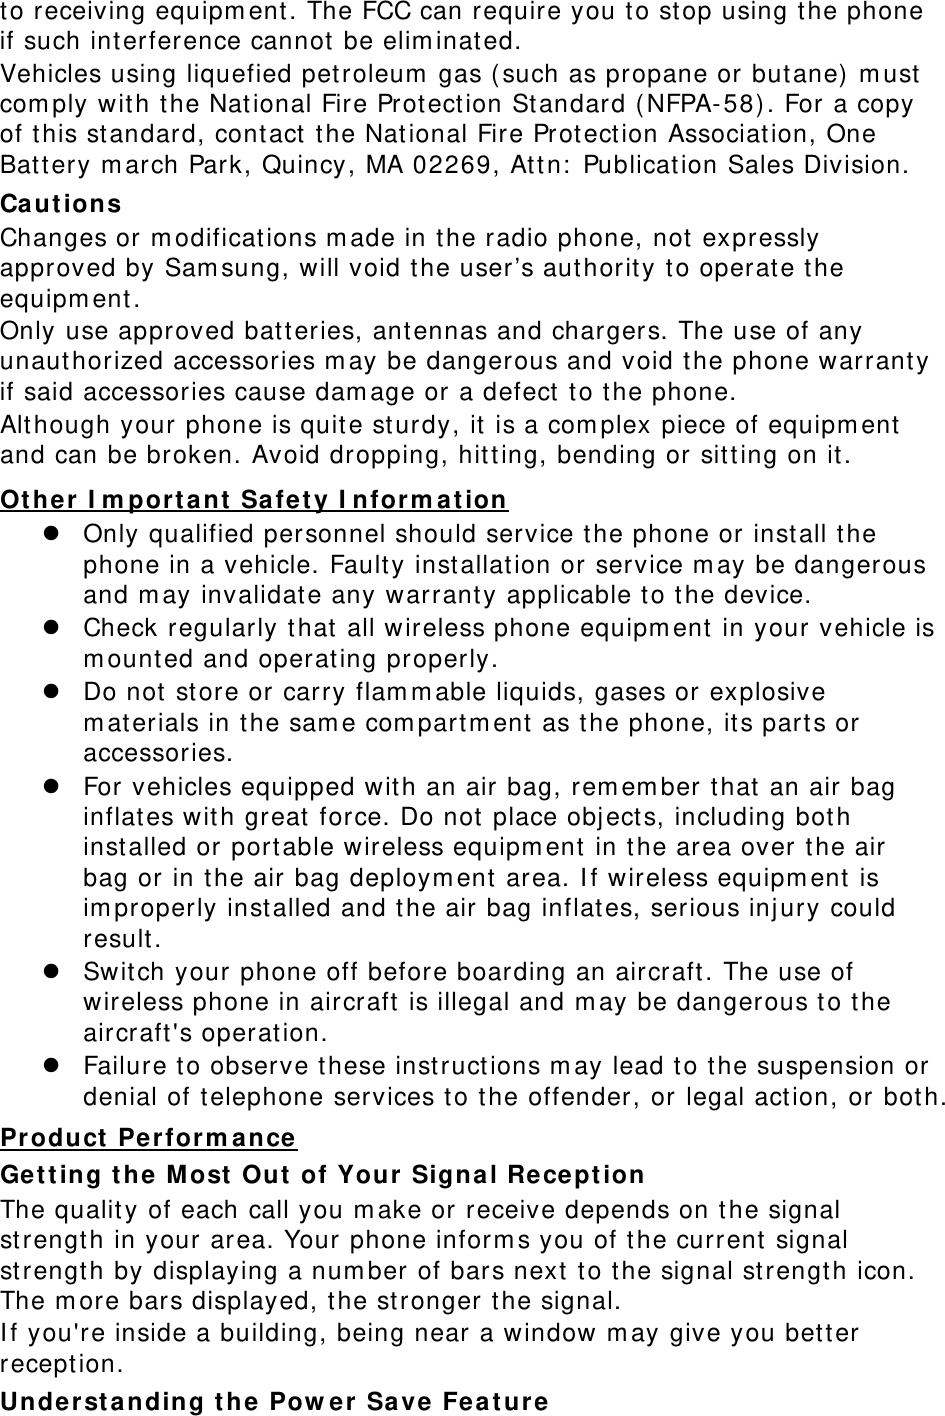 to receiving equipm ent . The FCC can require you to stop using the phone if such int erference cannot be elim inated. Vehicles using liquefied petroleum  gas ( such as propane or but ane) m ust  com ply wit h the National Fire Protect ion St andard ( NFPA-58) . For a copy of this st andard, cont act  t he Nat ional Fire Prot ect ion Association, One Batt ery m arch Park, Quincy , MA 02269, At t n:  Publication Sales Division. Ca ut ions Changes or m odifications m ade in the r adio phone, not expressly approved by Sam sung, will void t he user’s authority t o operate t he equipm ent .  Only use approved batt eries, antennas and chargers. The use of any unaut horized accessories m ay be dangerous and void t he phone warrant y if said accessories cause dam age or a defect  to t he phone. Alt hough your phone is quit e st urdy, it  is a com plex piece of equipm ent  and can be broken. Avoid dropping, hit t ing, bending or sit t ing on it .  Only qualified personnel should service t he phone or inst all t he phone in a vehicle. Faulty inst allat ion or service m ay be dangerous and m ay invalidat e any warrant y applicable t o t he device. Ot her  I m port a nt  Safet y I nform at ion  Check regularly t hat all wireless phone equipm ent  in your vehicle is m ount ed and operating properly.  Do not st ore or carry flam m able liquids, gases or explosive m aterials in the sam e com partm ent  as the phone, its part s or accessories.  For vehicles equipped w ith an air bag, rem em ber t hat an air bag inflat es wit h gr eat force. Do not  place obj ect s, including bot h inst alled or port able wireless equipm ent  in t he area over t he air bag or in the air bag deploym ent  area. I f wireless equipm ent  is im properly inst alled and t he air bag inflates, serious inj ury could result .  Switch your phone off before boarding an aircraft . The use of wireless phone in aircraft  is illegal and m ay be dangerous t o t he aircraft&apos;s operation.  Failure t o observe these inst ruct ions m ay lead t o t he suspension or denial of telephone services t o t he offender, or legal act ion, or both. Get t ing t he M ost  Out  of Your Signa l Recept ion Product Per form ance  The quality of each call you m ake or receive depends on t he signal strength in your area. Your phone inform s you of t he current signal strength by displaying a num ber of bars next  t o t he signal st rengt h icon. The m ore bars displayed, t he st ronger t he signal. I f you&apos;re inside a building, being near a window m ay give you bett er reception. Unde r st a nding t he Pow e r  Save  Fea t ure 